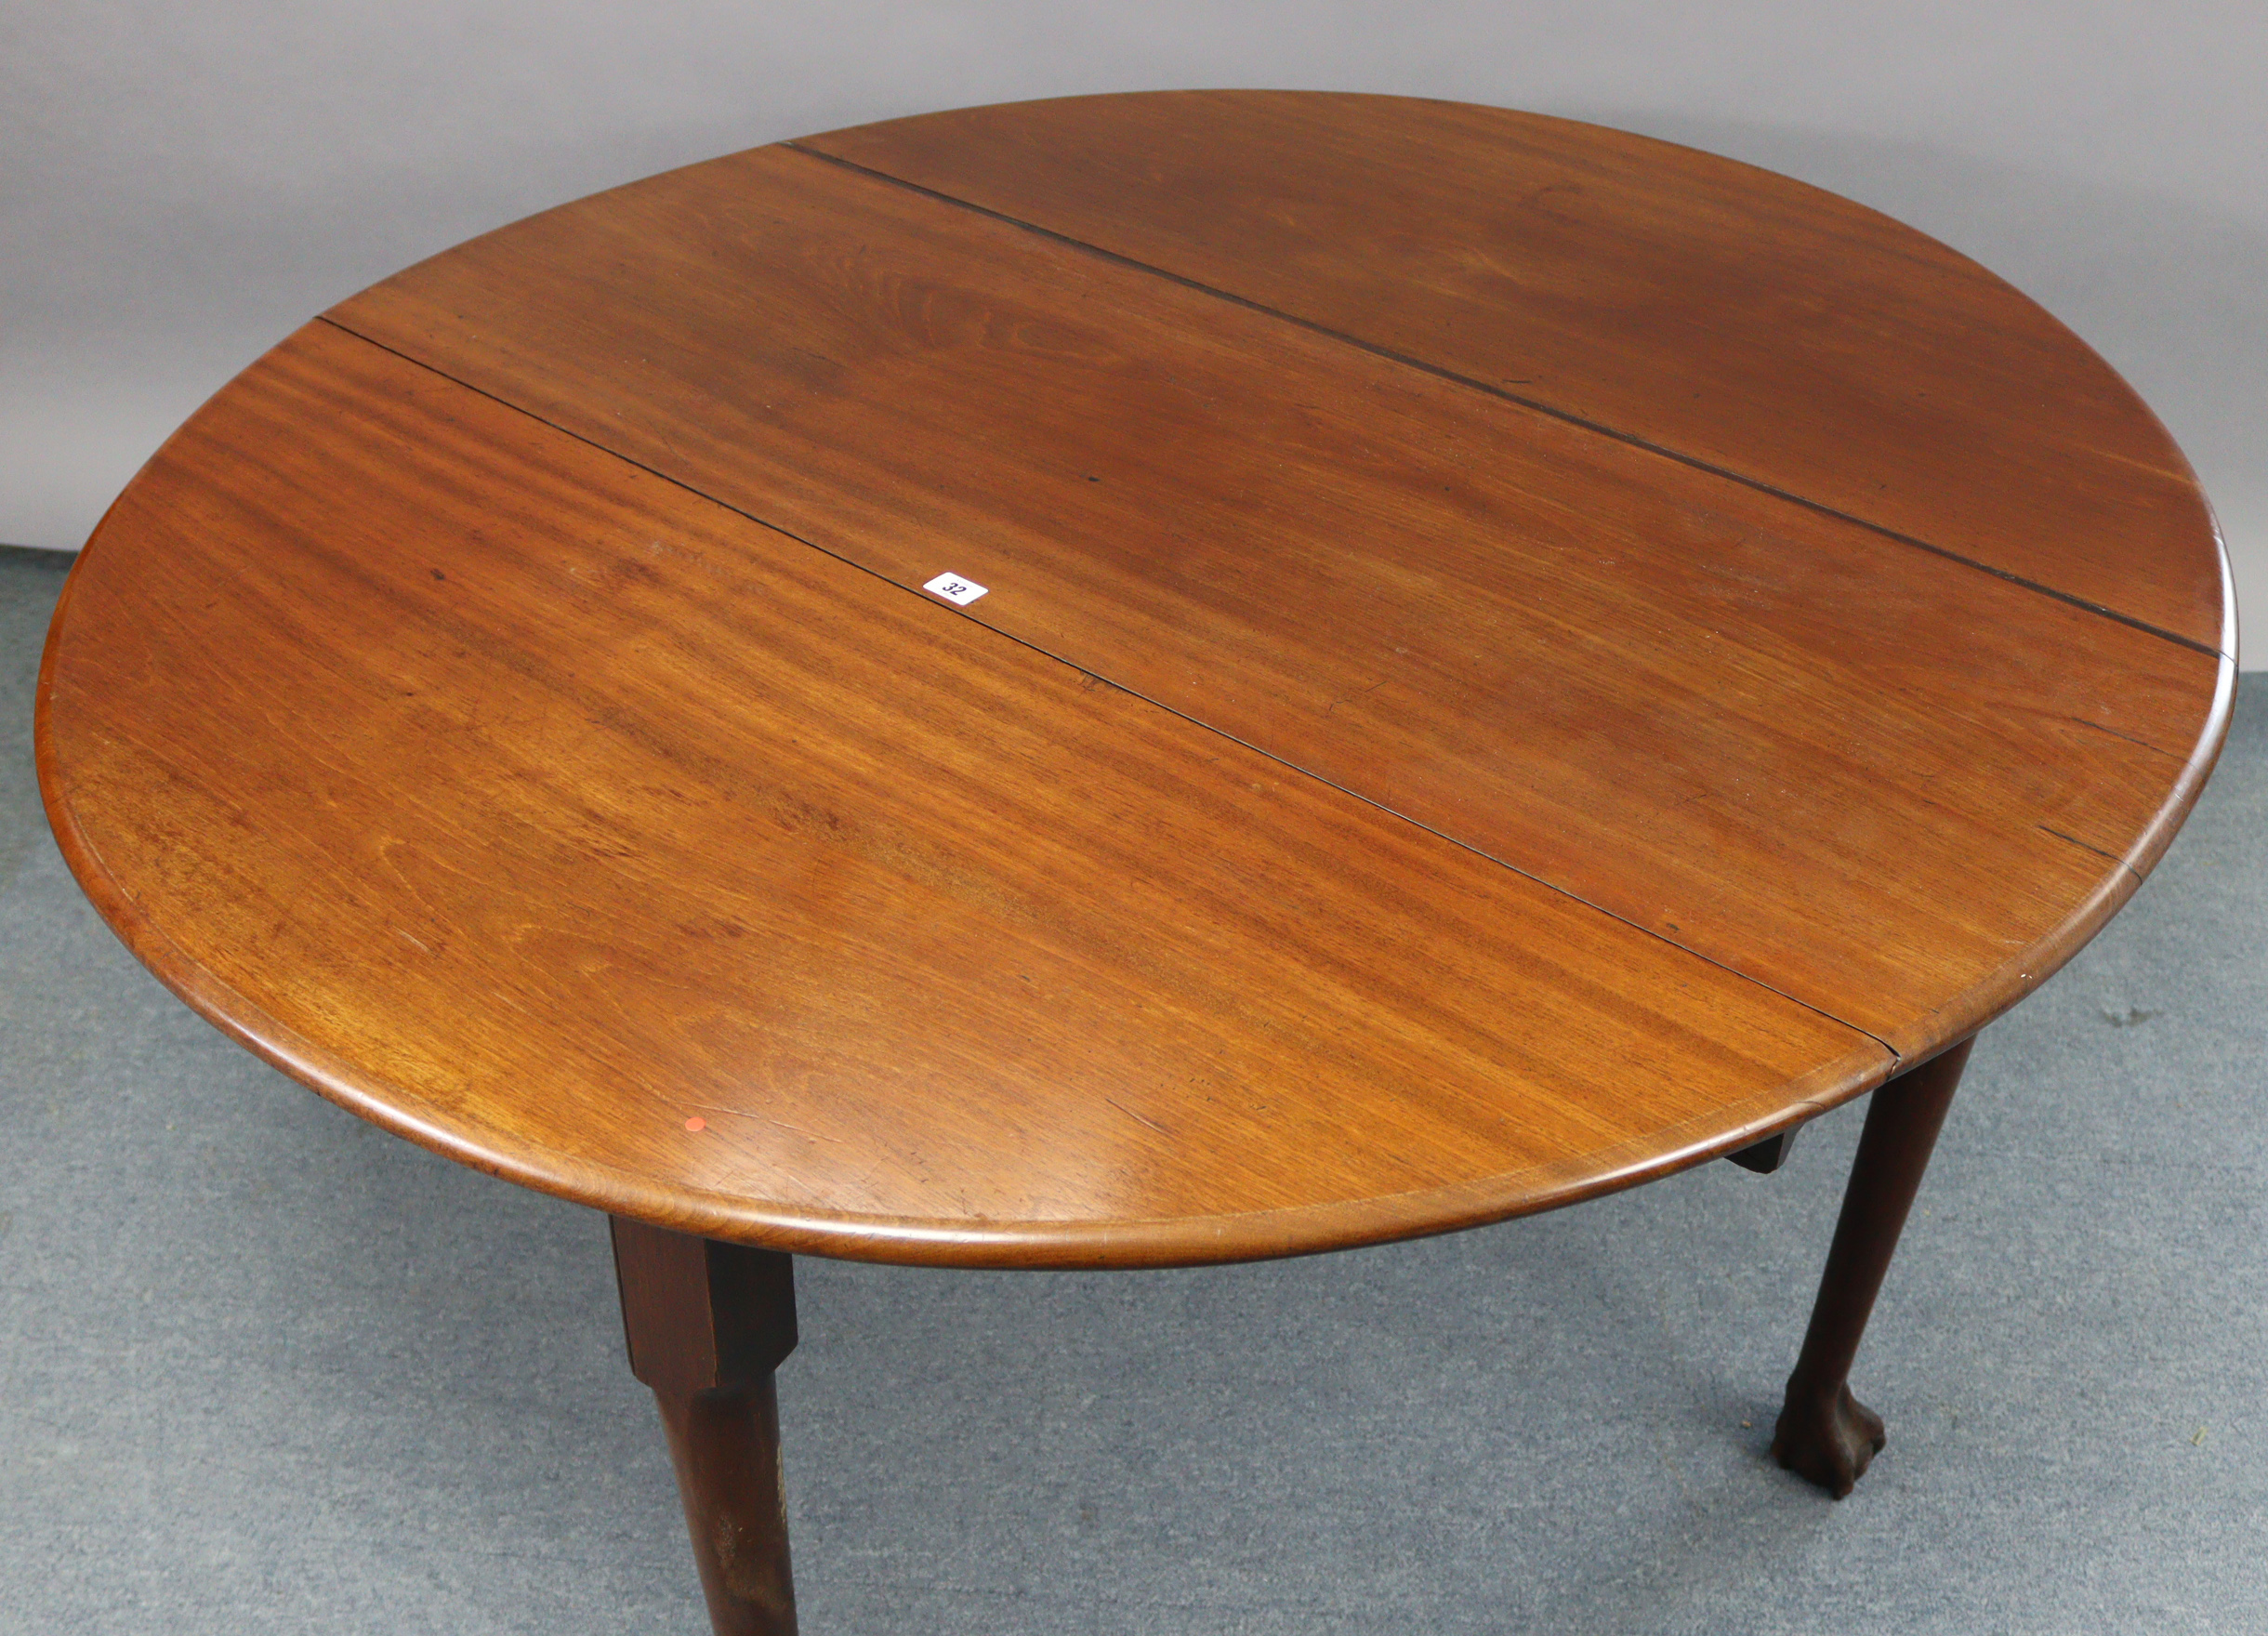 A late 19th century mahogany drop-leaf dining table, with oval top & on four round tapered legs with - Image 3 of 3